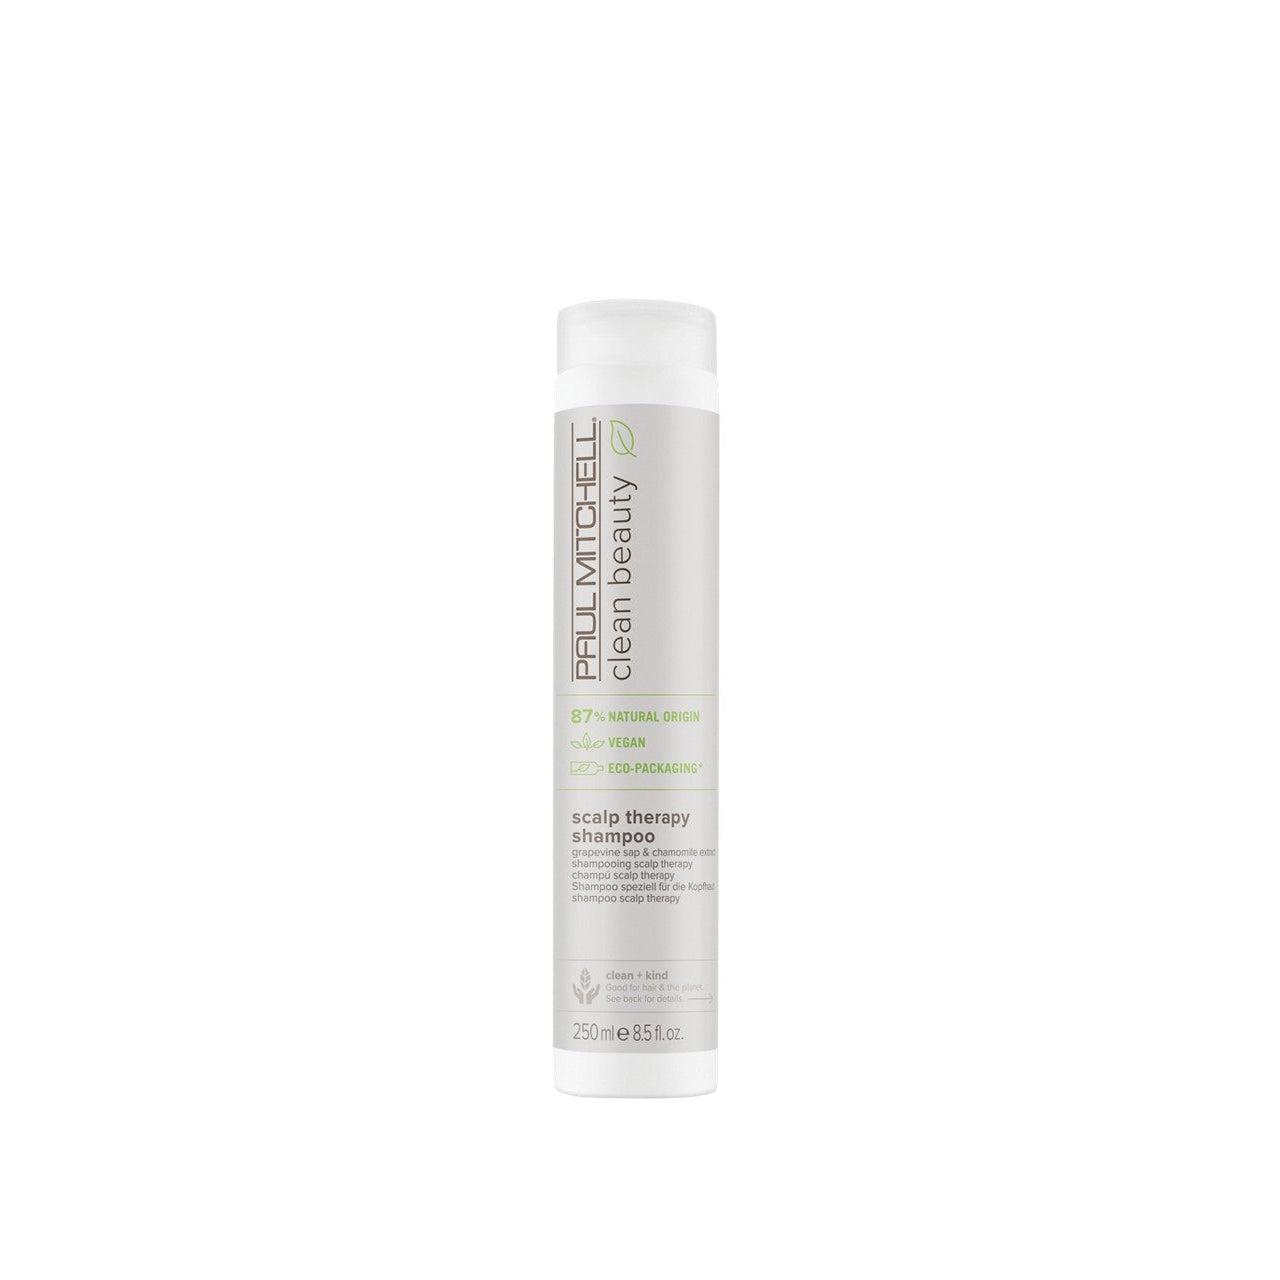 Paul Mitchell Clean Beauty Scalp Therapy